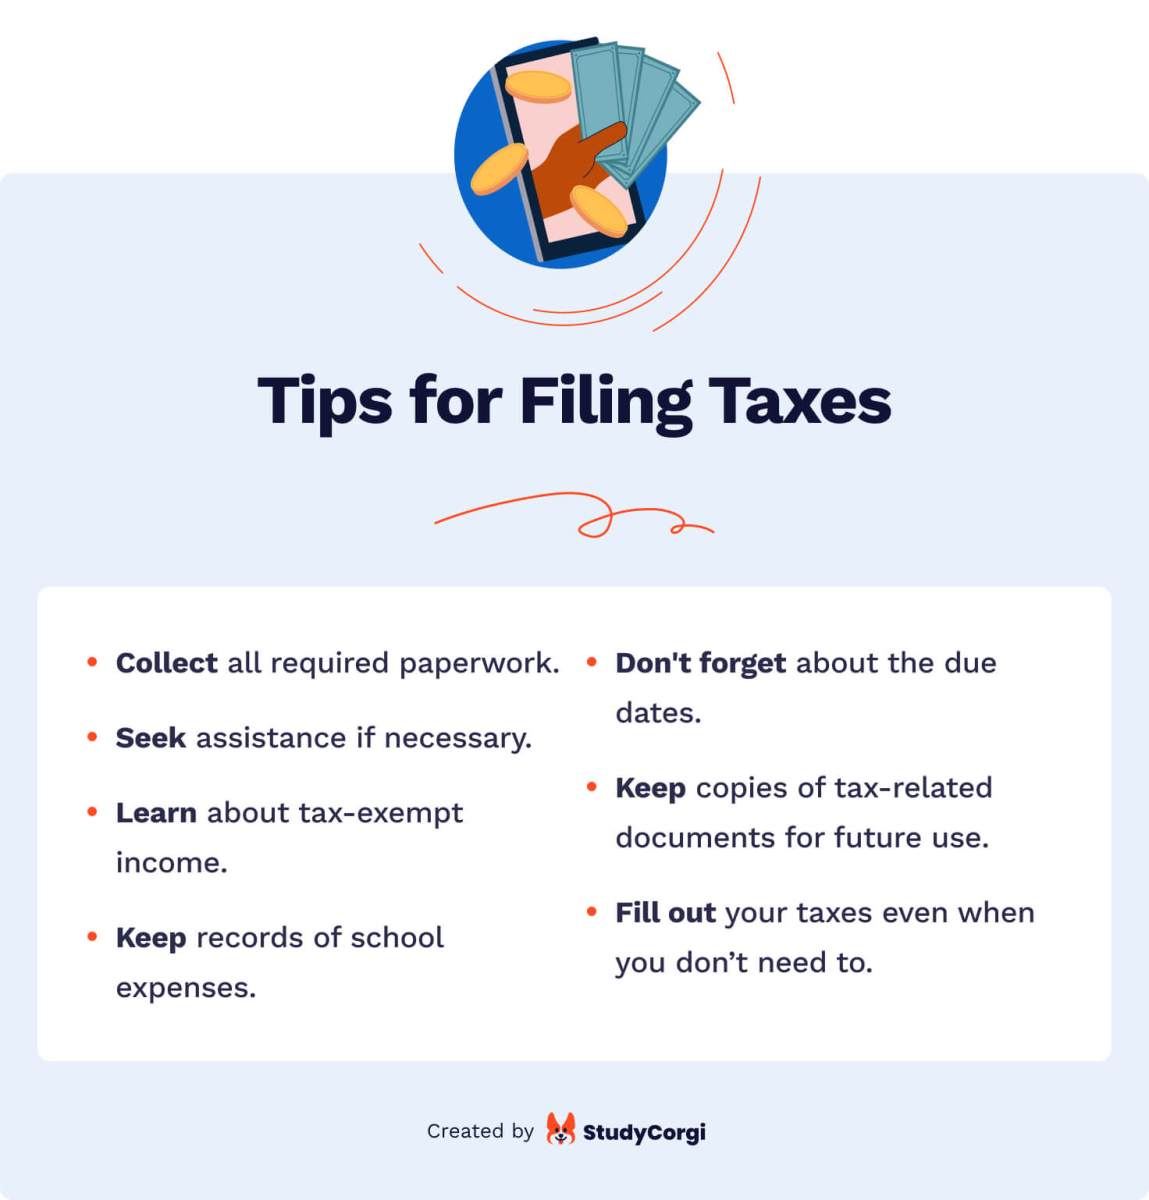 The picture presents tips for filing taxes more effectively.